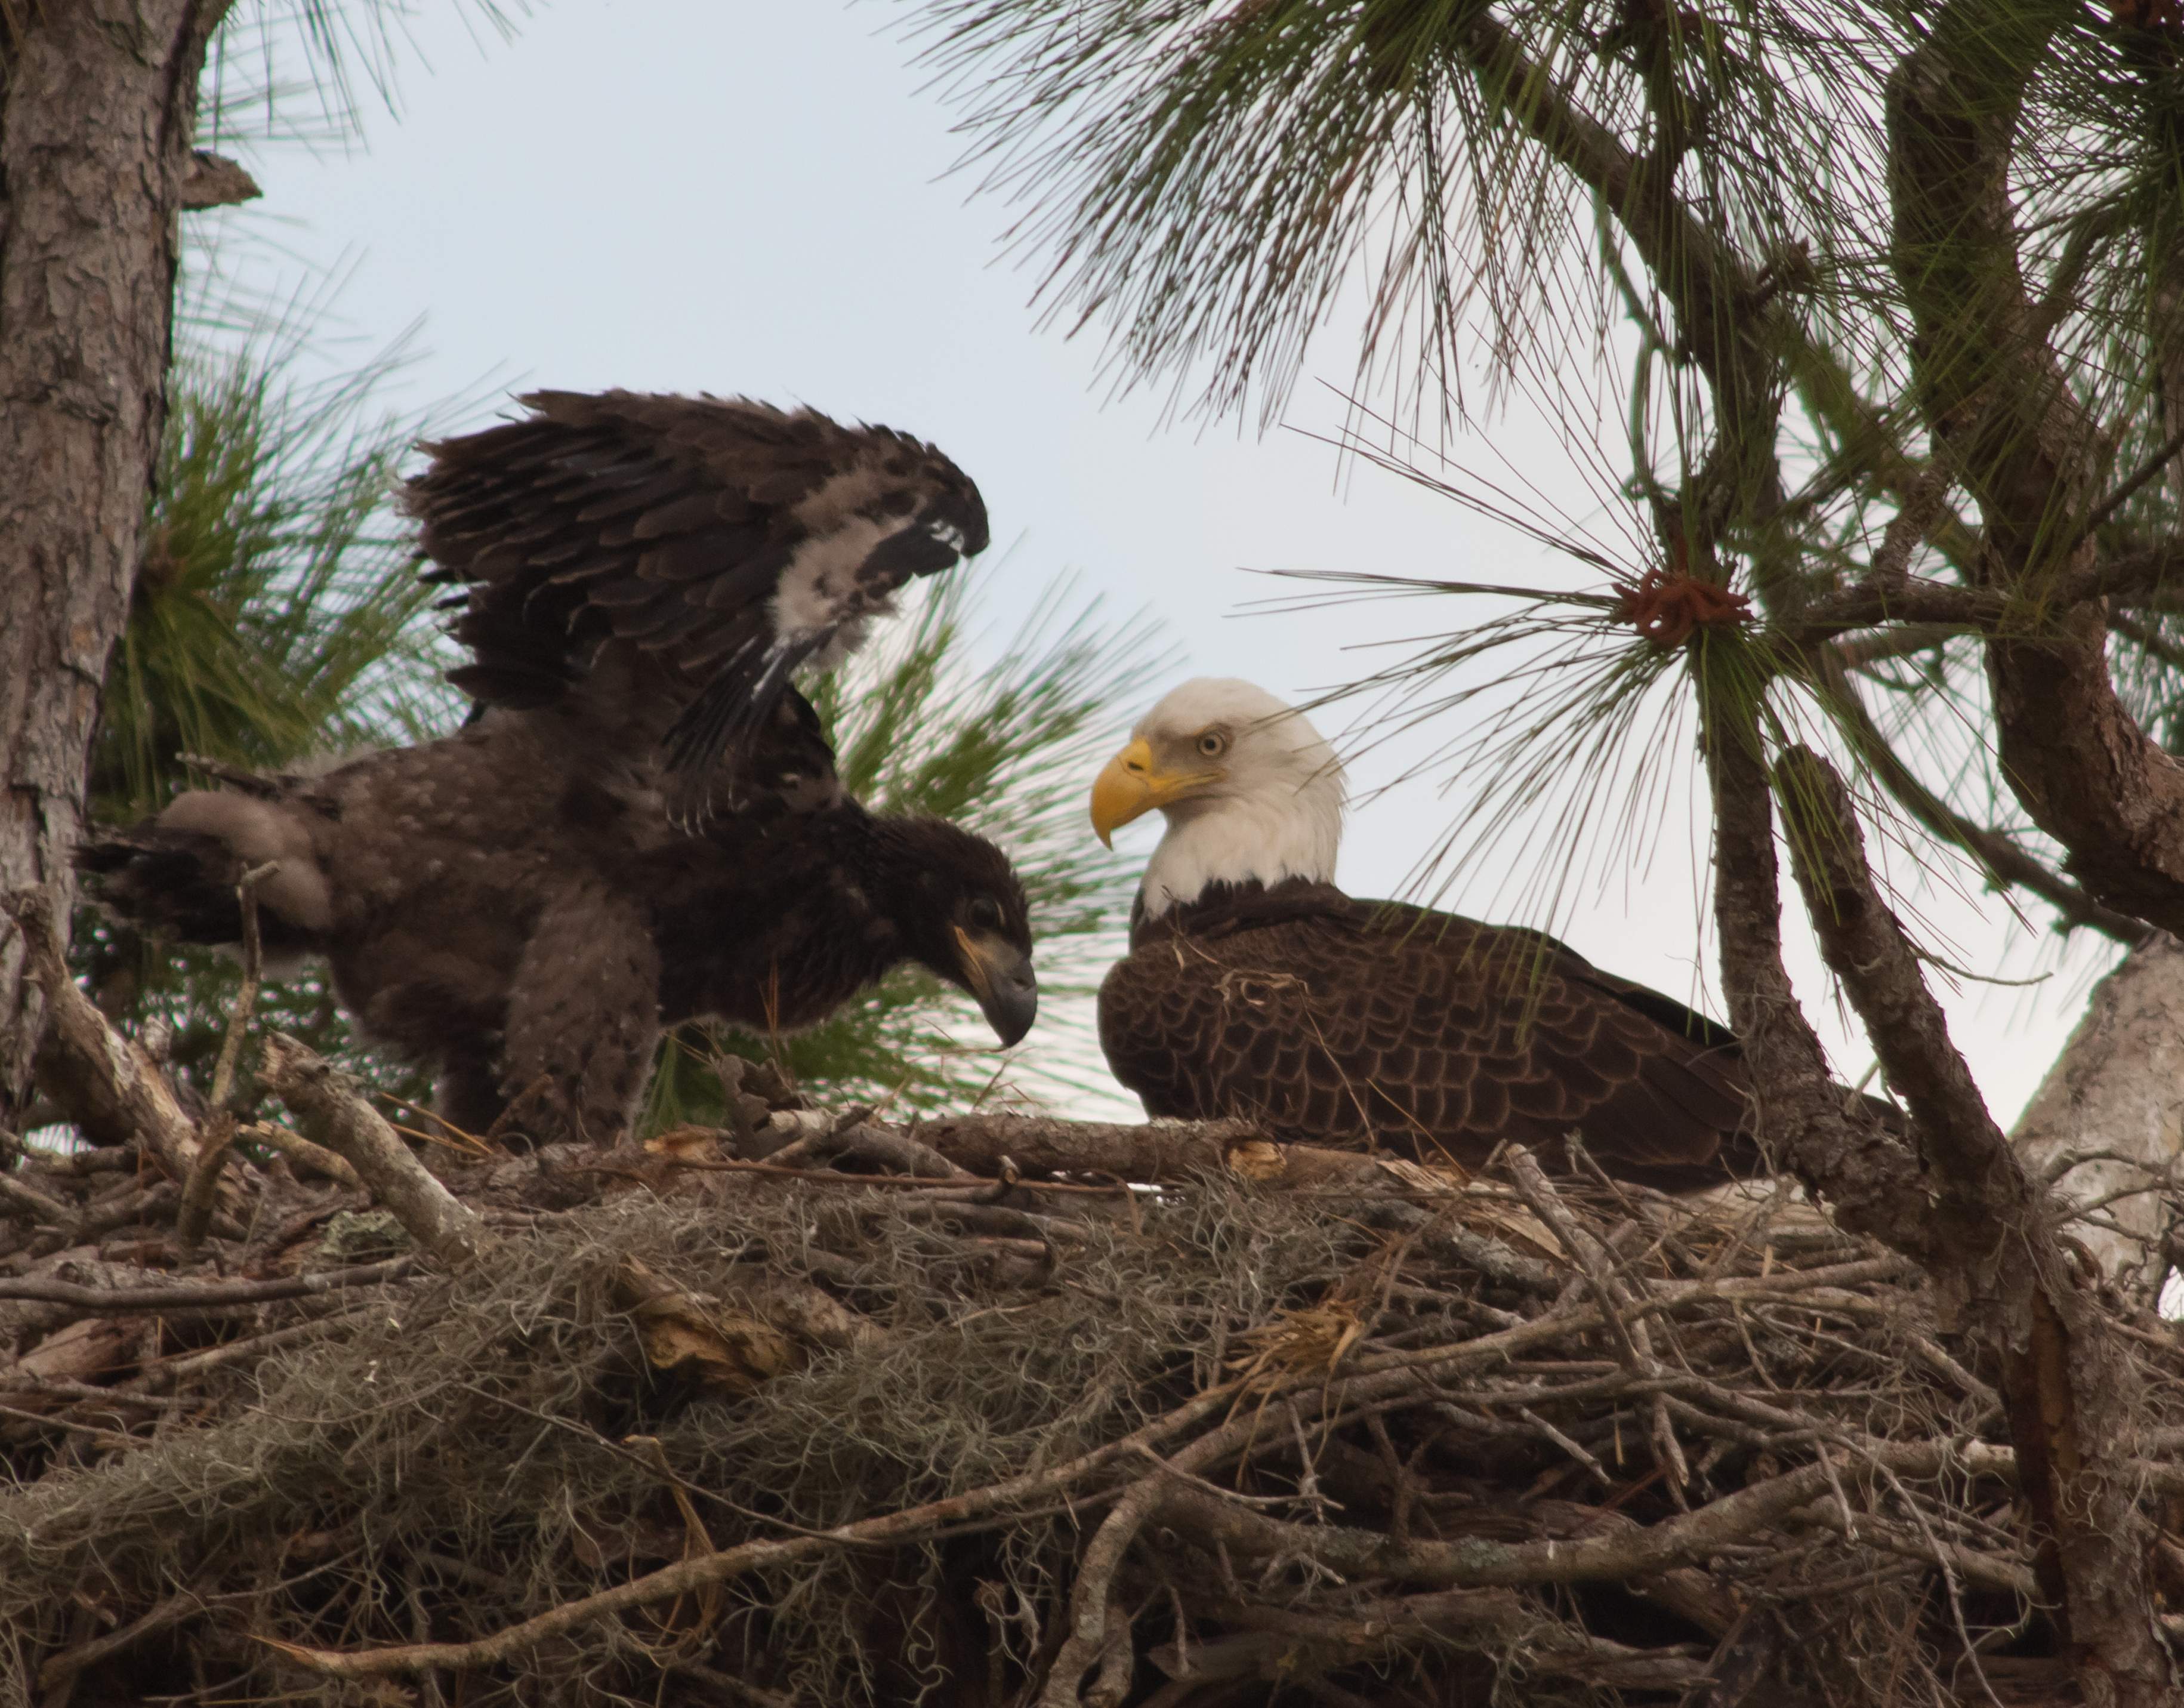 A pair of nesting bald eagles.